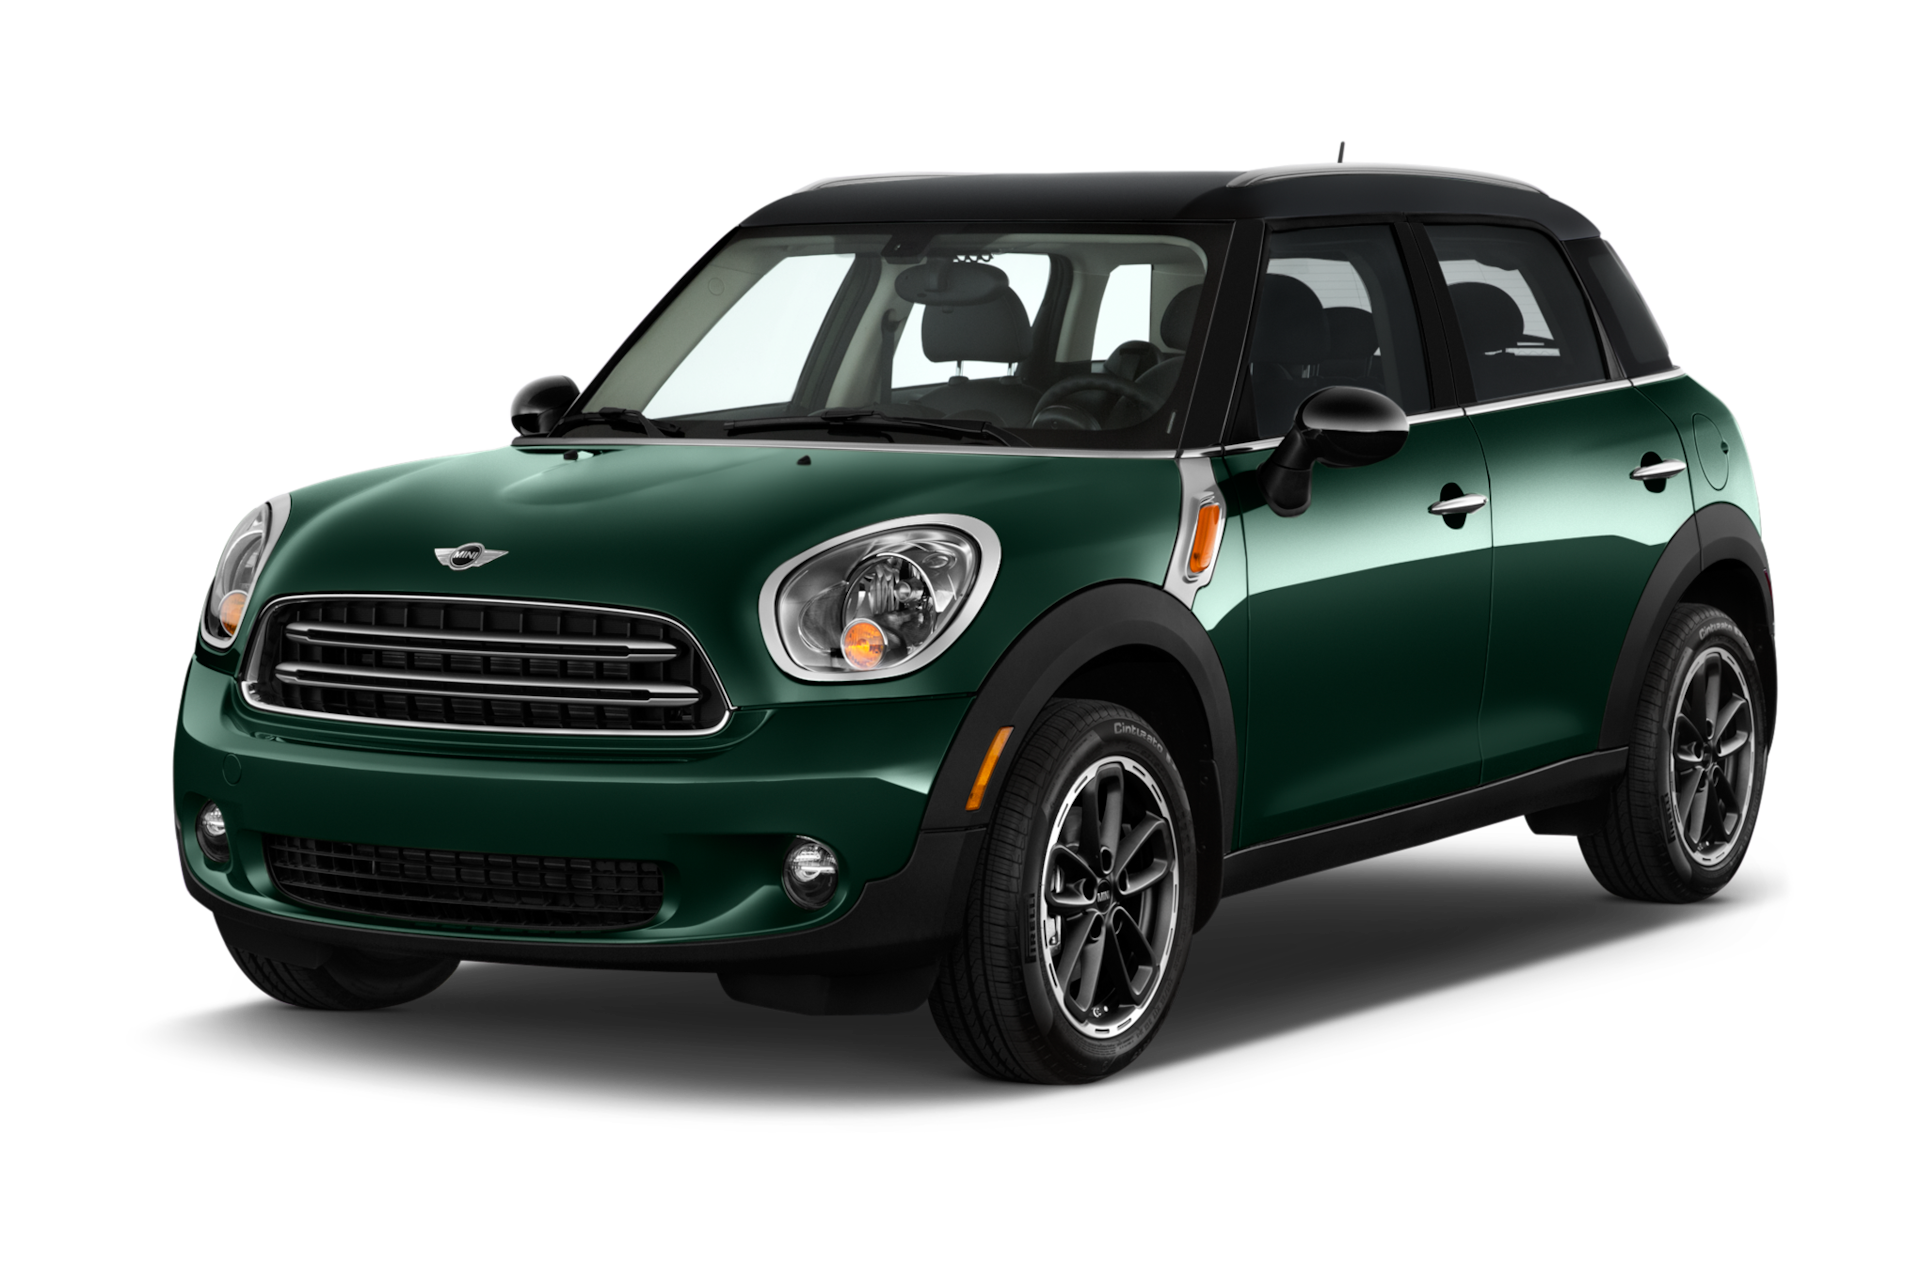 2016 MINI Cooper Countryman Prices, Reviews, and Photos - MotorTrend